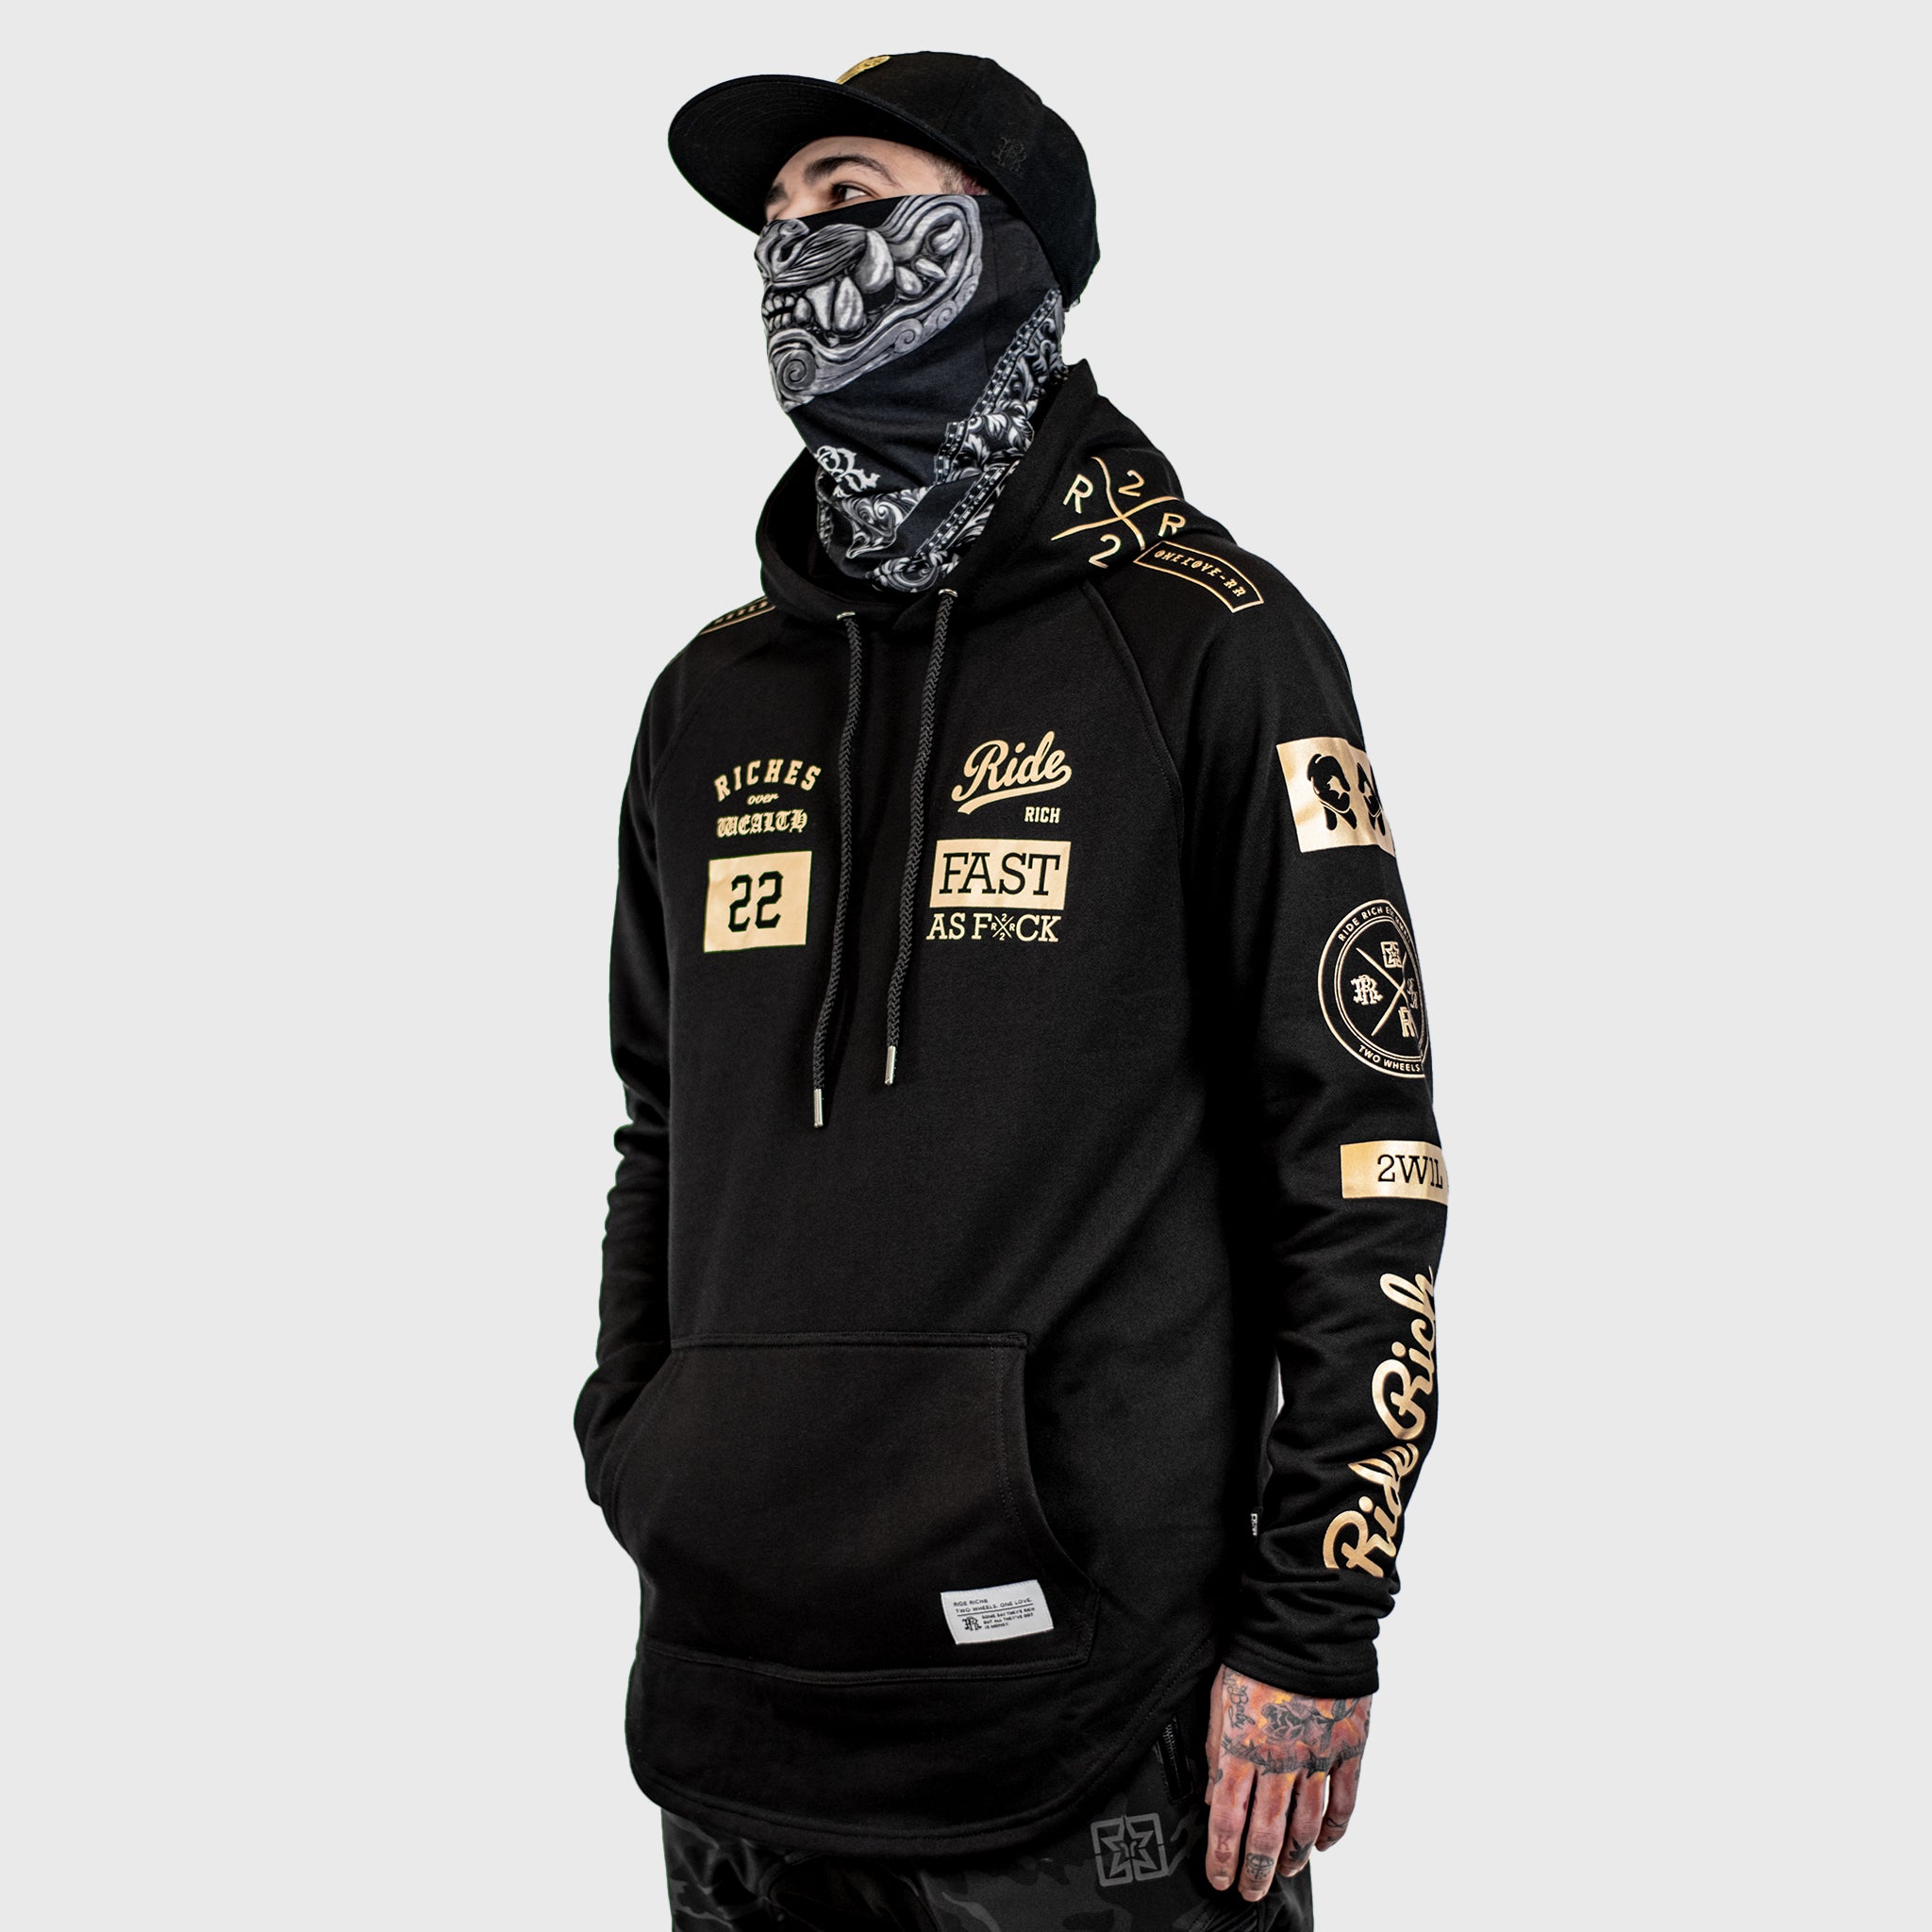 GoGo Gear Los Angeles Launches New Armored Kevlar Hoodie For